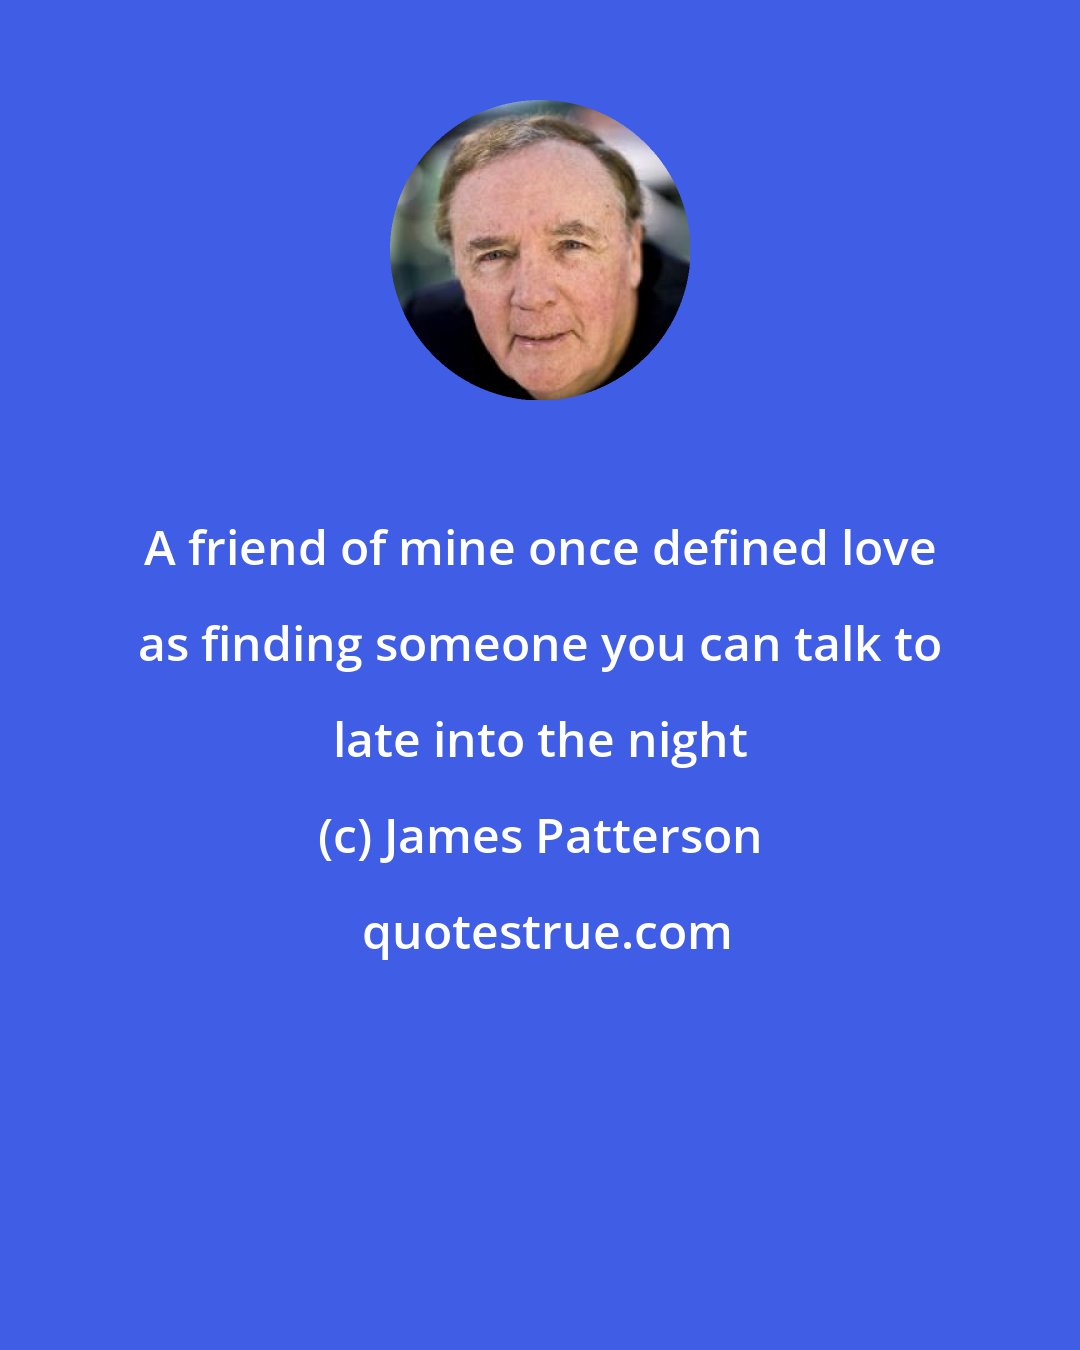 James Patterson: A friend of mine once defined love as finding someone you can talk to late into the night